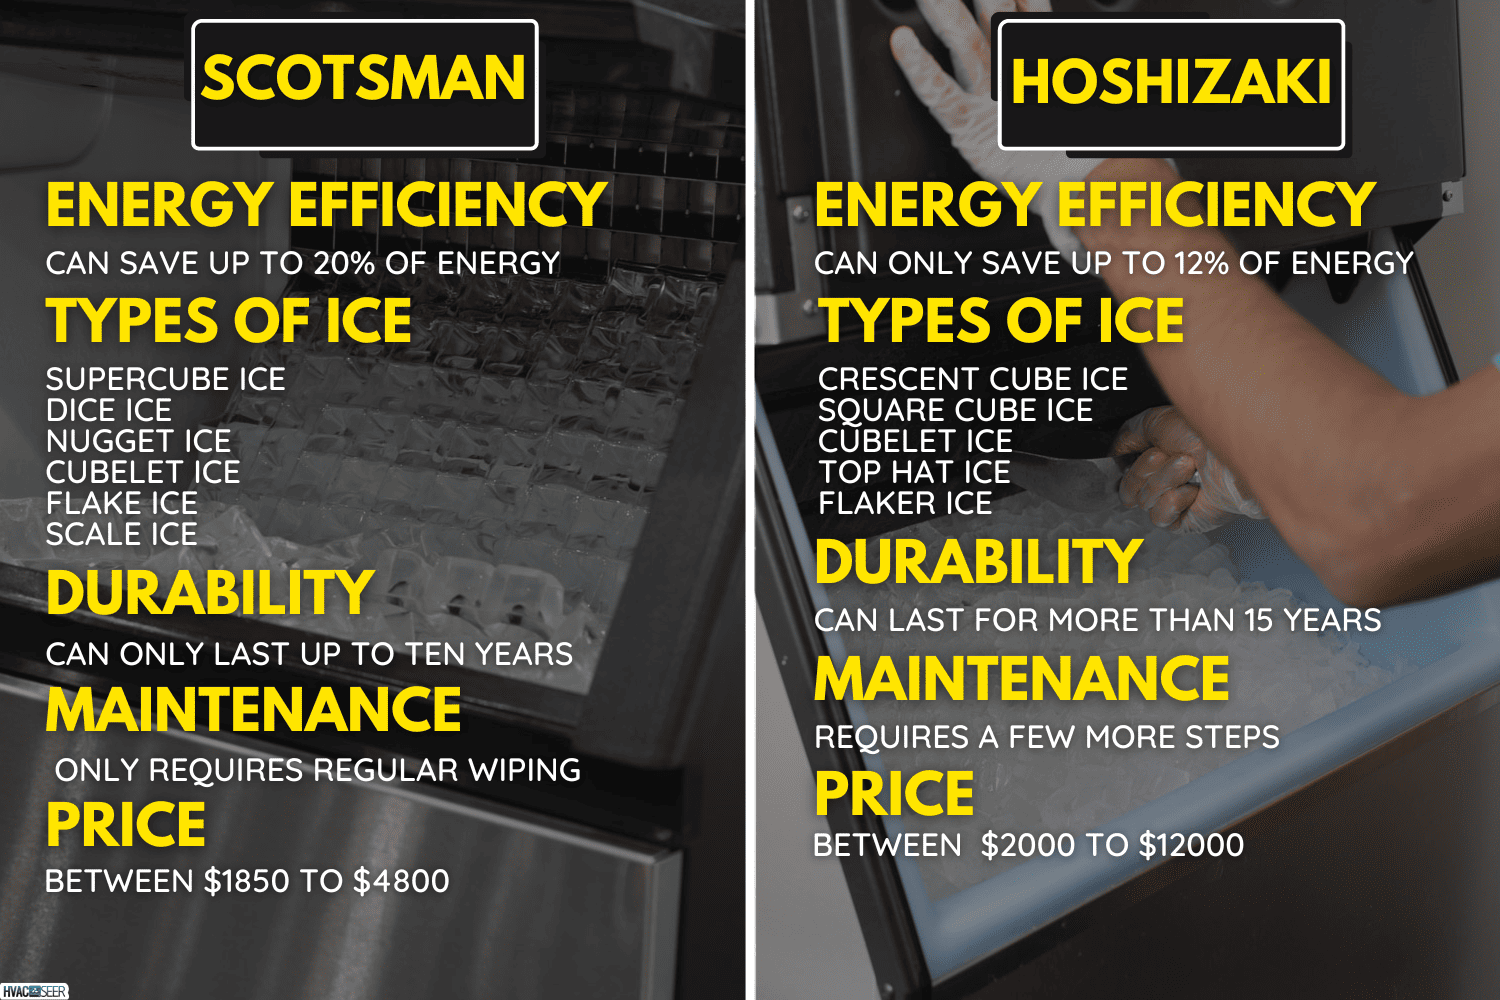 A view of an employee scooping ice out of an ice machine, in a restaurant setting, Scotsman Vs Hoshizaki Ice Machines What Are The Differences